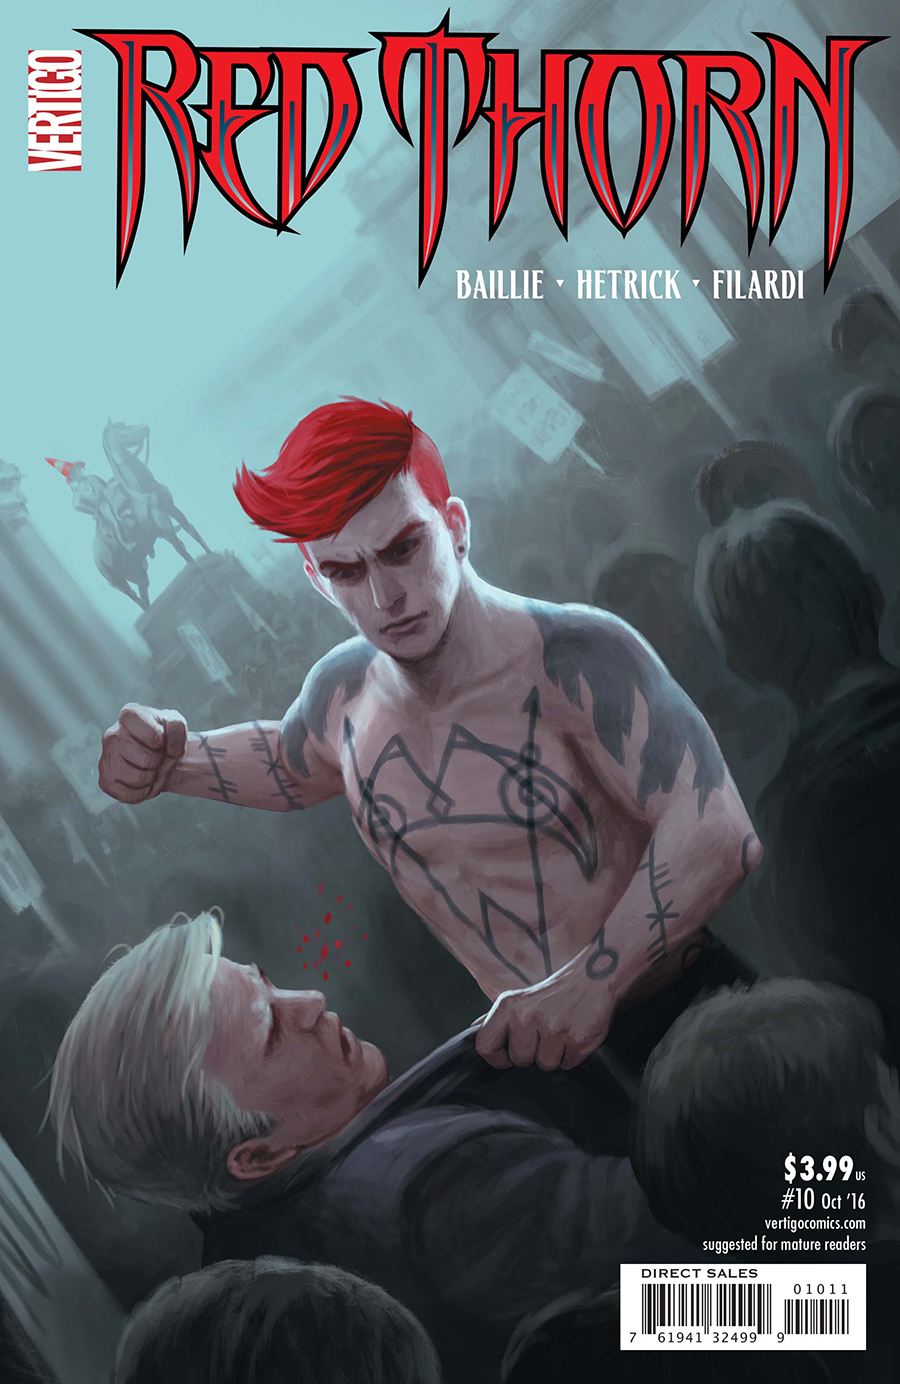 RED THORN #10 (MR)